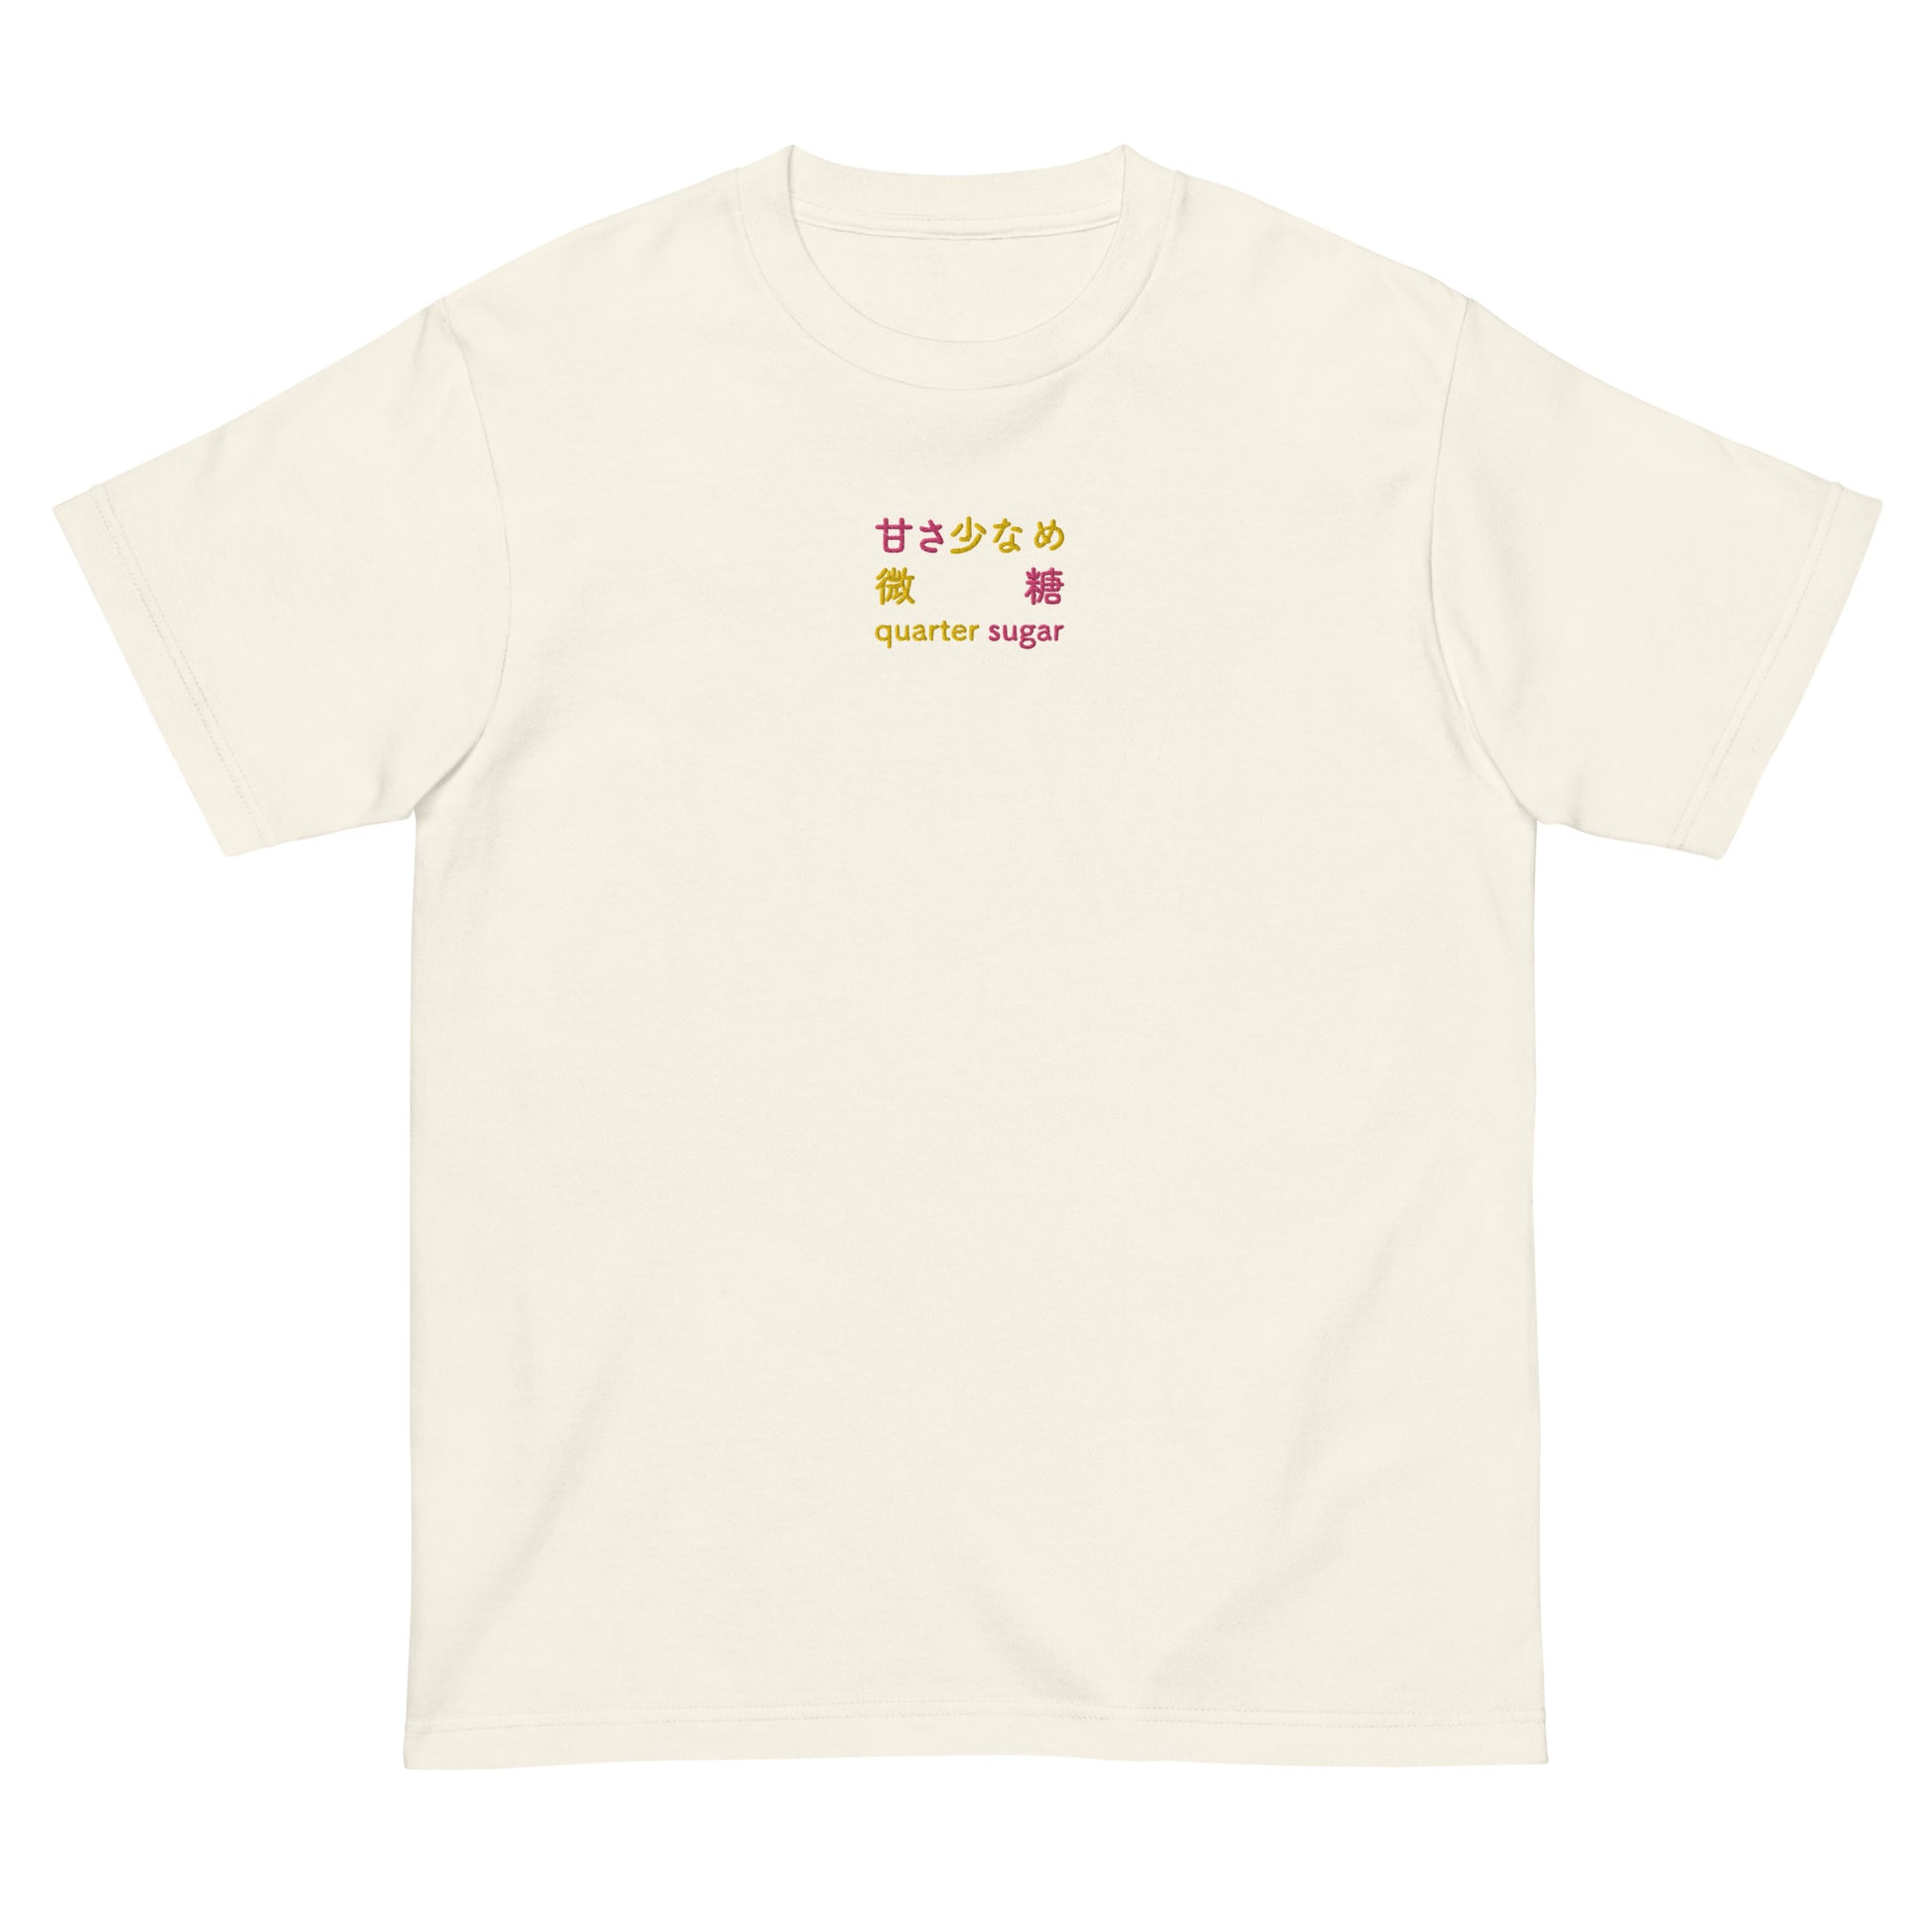 Ivory High Quality Tee - Front Design with an Yellow, Pink Embroidery "Quarter Sugar" in Japanese,Chinese and English